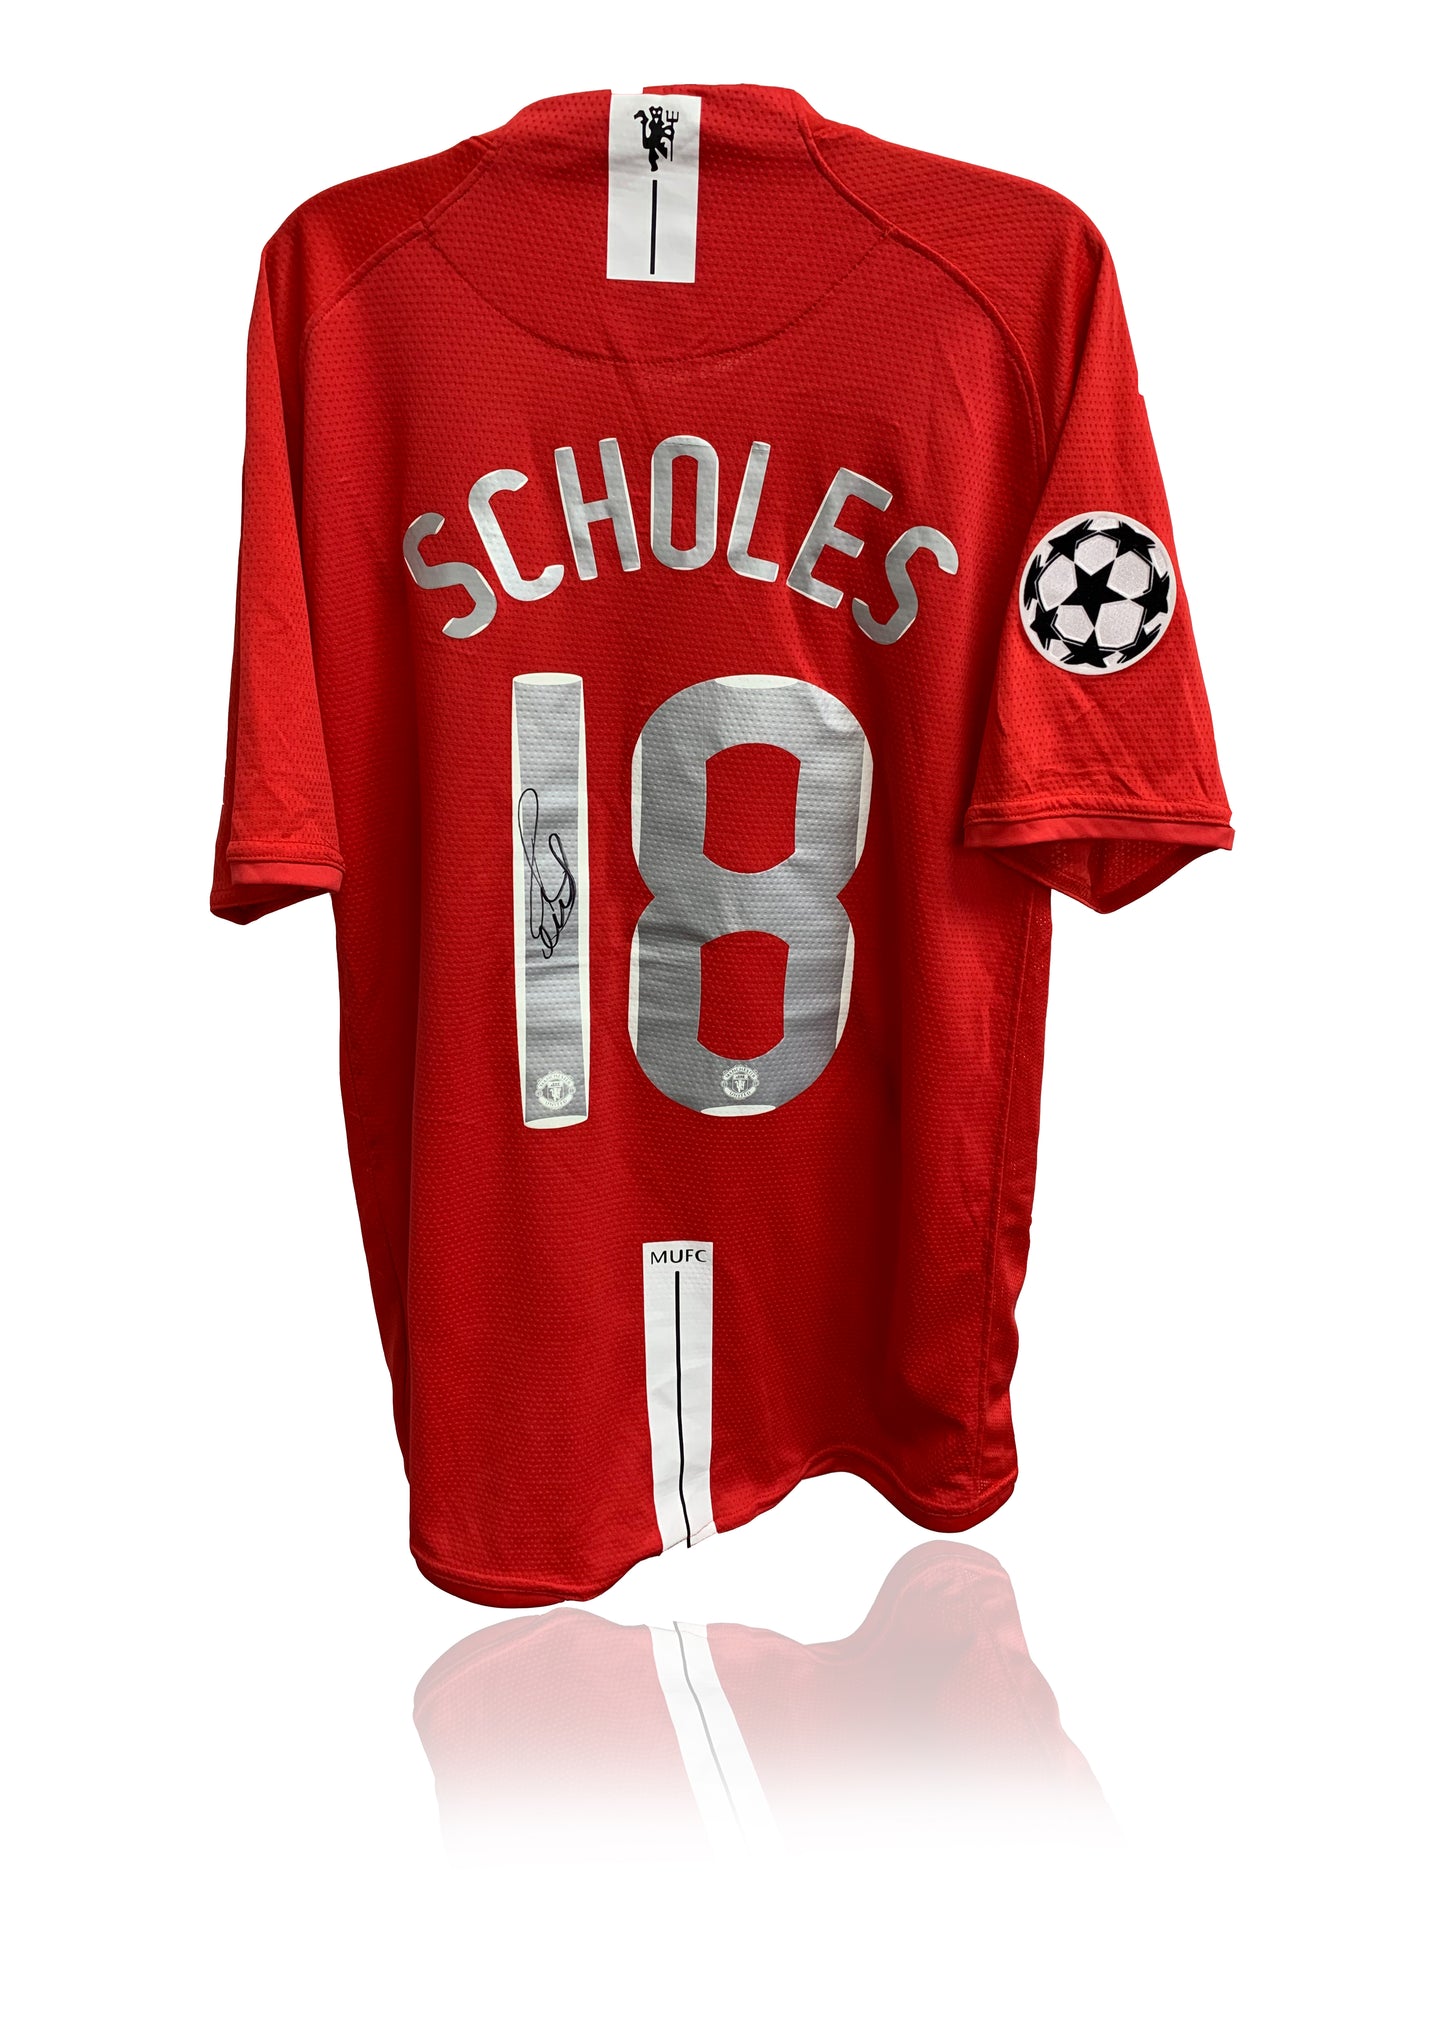 Paul Scholes Signed 2008 Manchester United Shirt